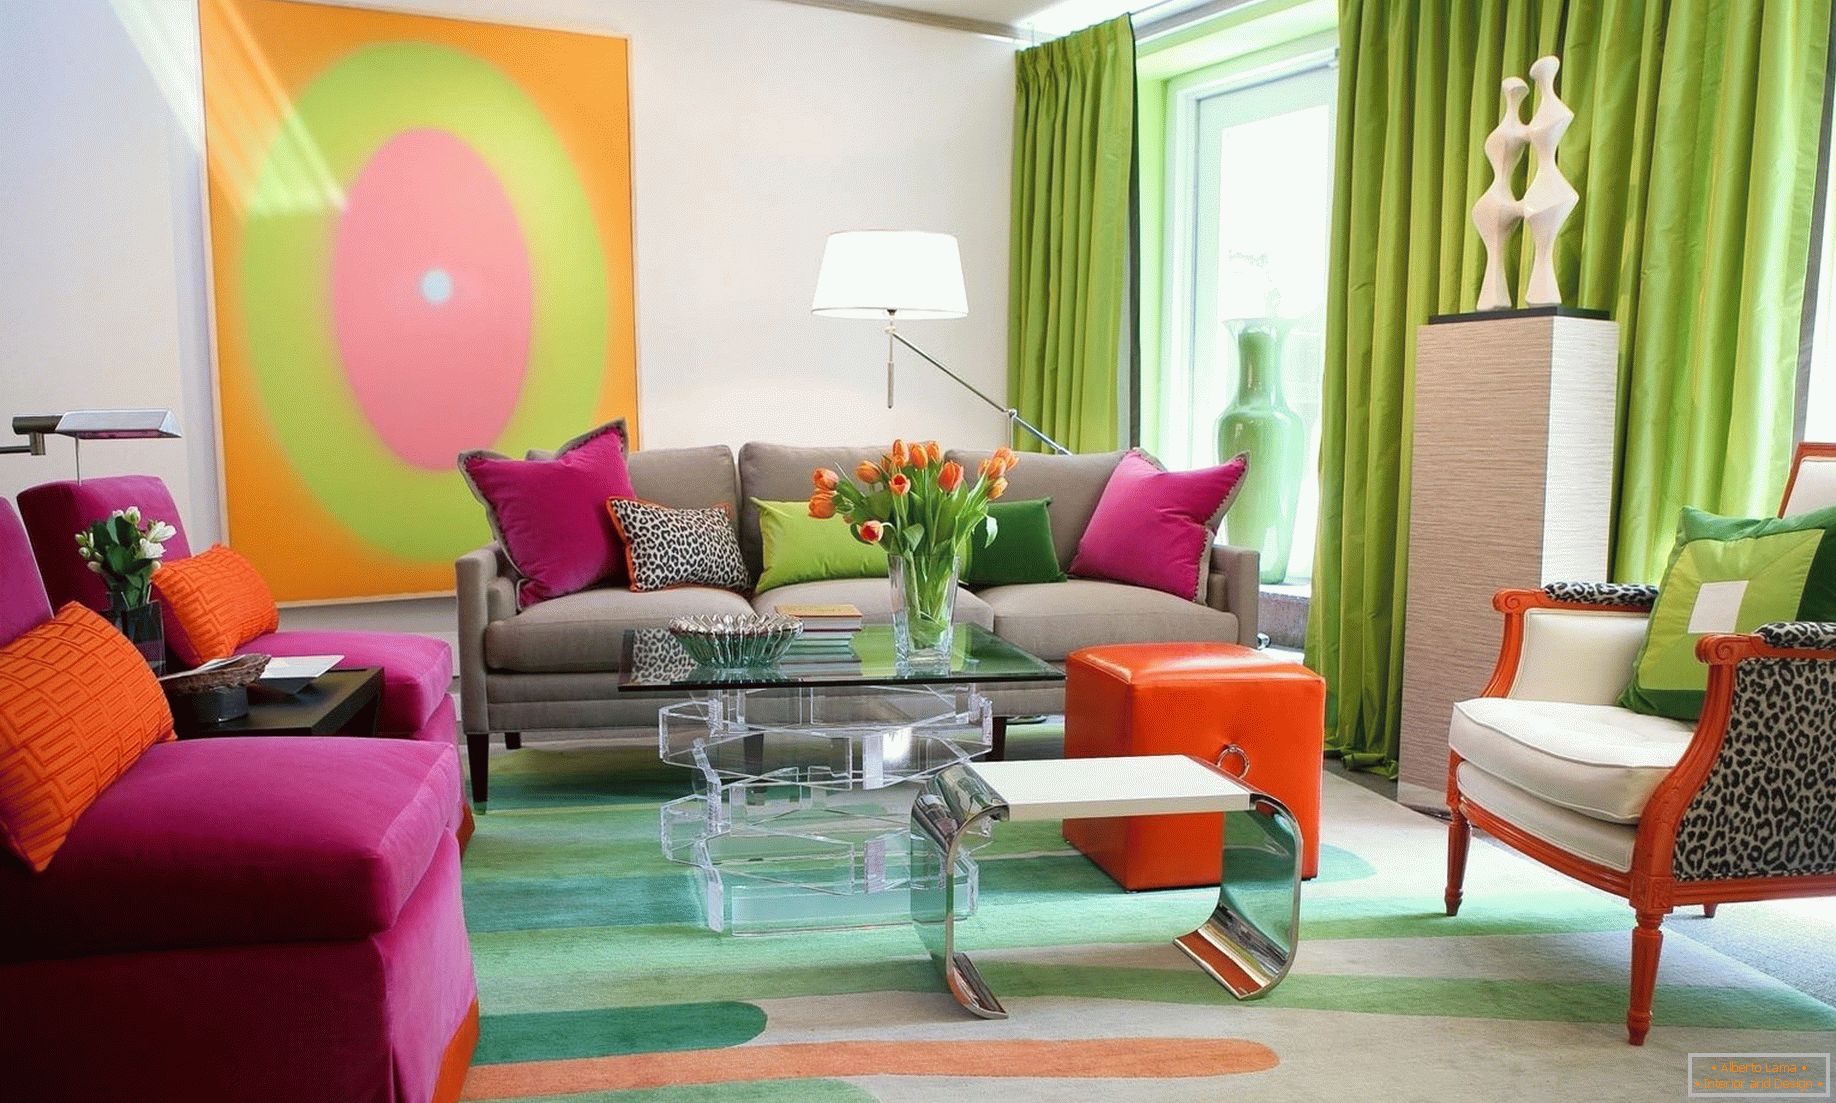 Bright colors in the living room decor